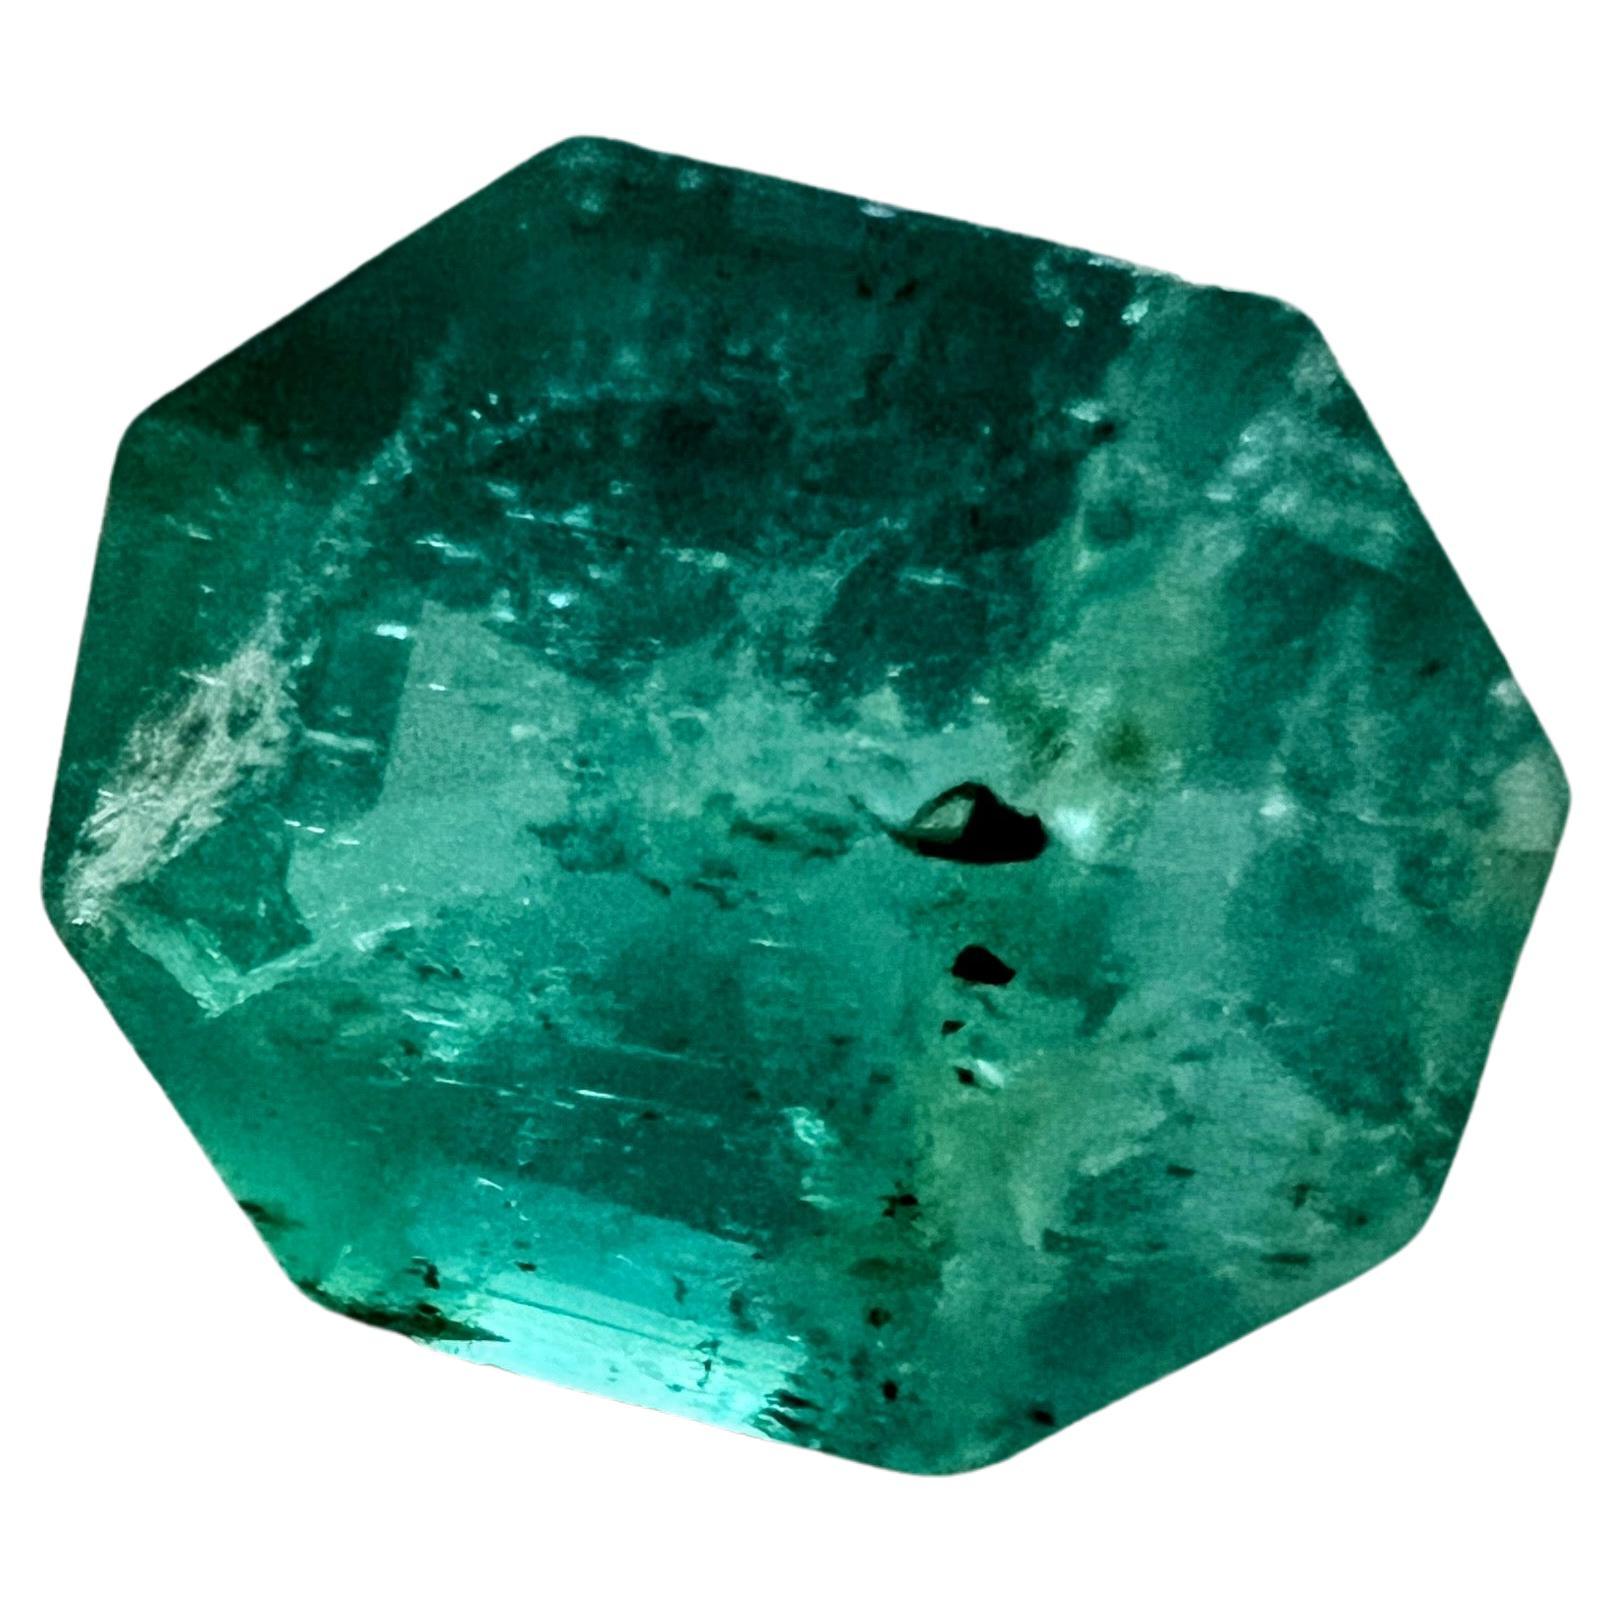 Octagon Cut NO RESERVE 2.02ct Octagonal Cut NO-OIL Natural Untreated EMERALD Gemstone For Sale